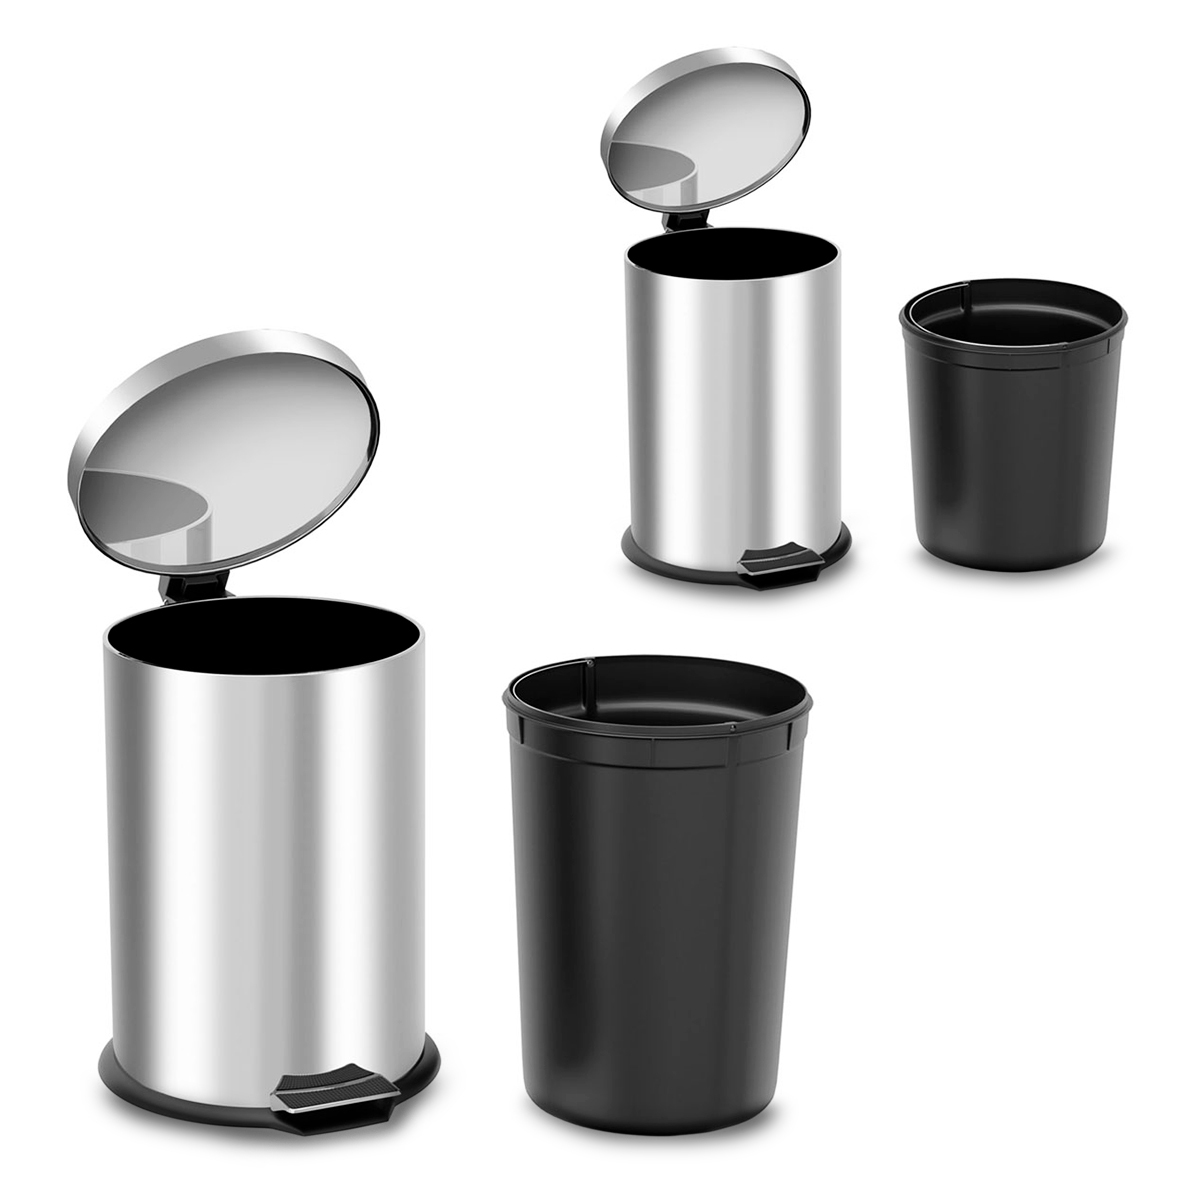 BOTE BASURA OD METAL 2PACK | Office Depot Mexico